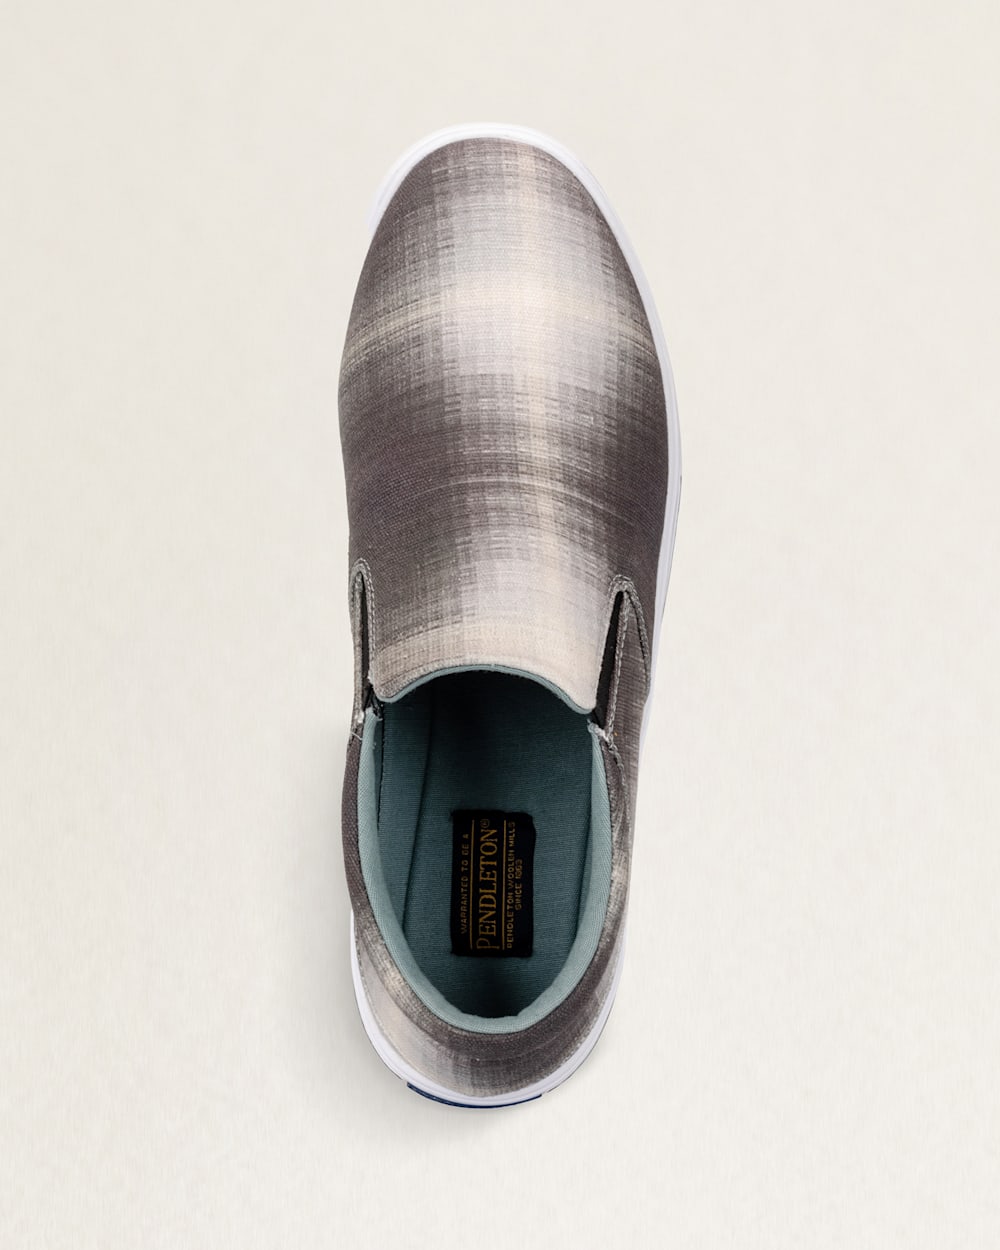 ALTERNATE VIEW OF MEN'S ROUND TOE SLIP-ON SHOES IN BLACK OMBRE image number 5